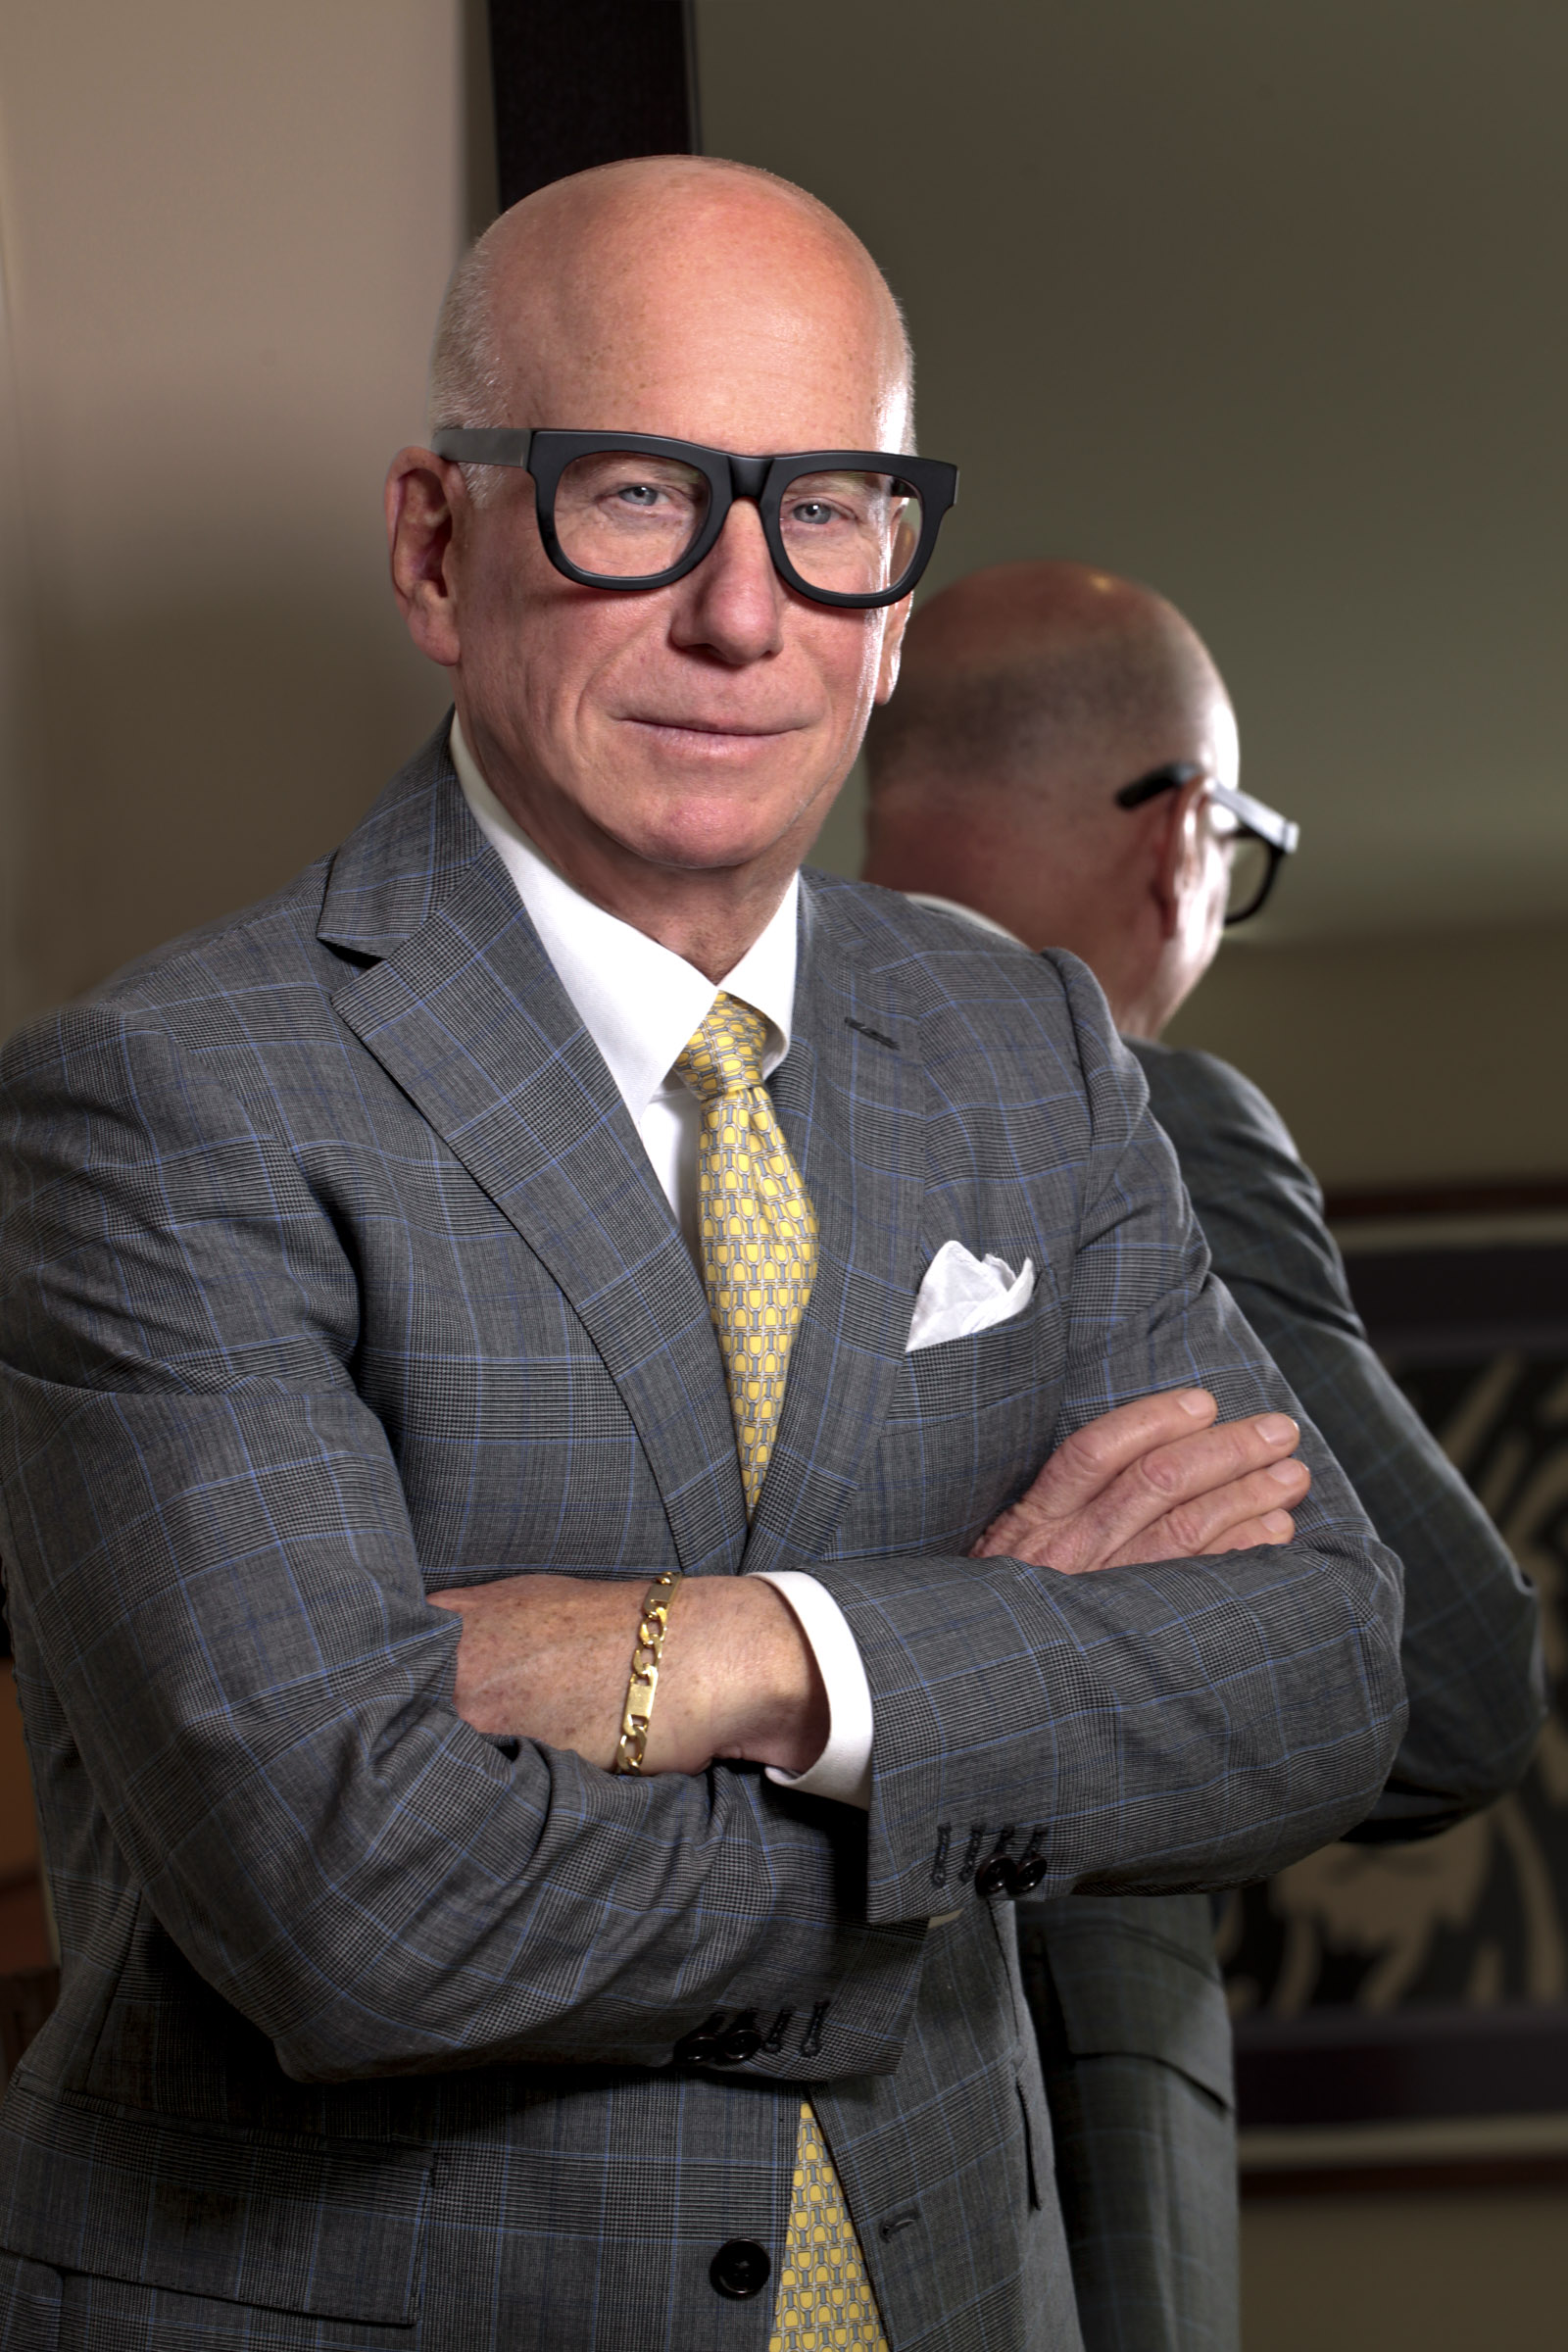 Mr. Marks, Business Corporate Portraits and Headshots by NYC Photographer Tess Steinkolk